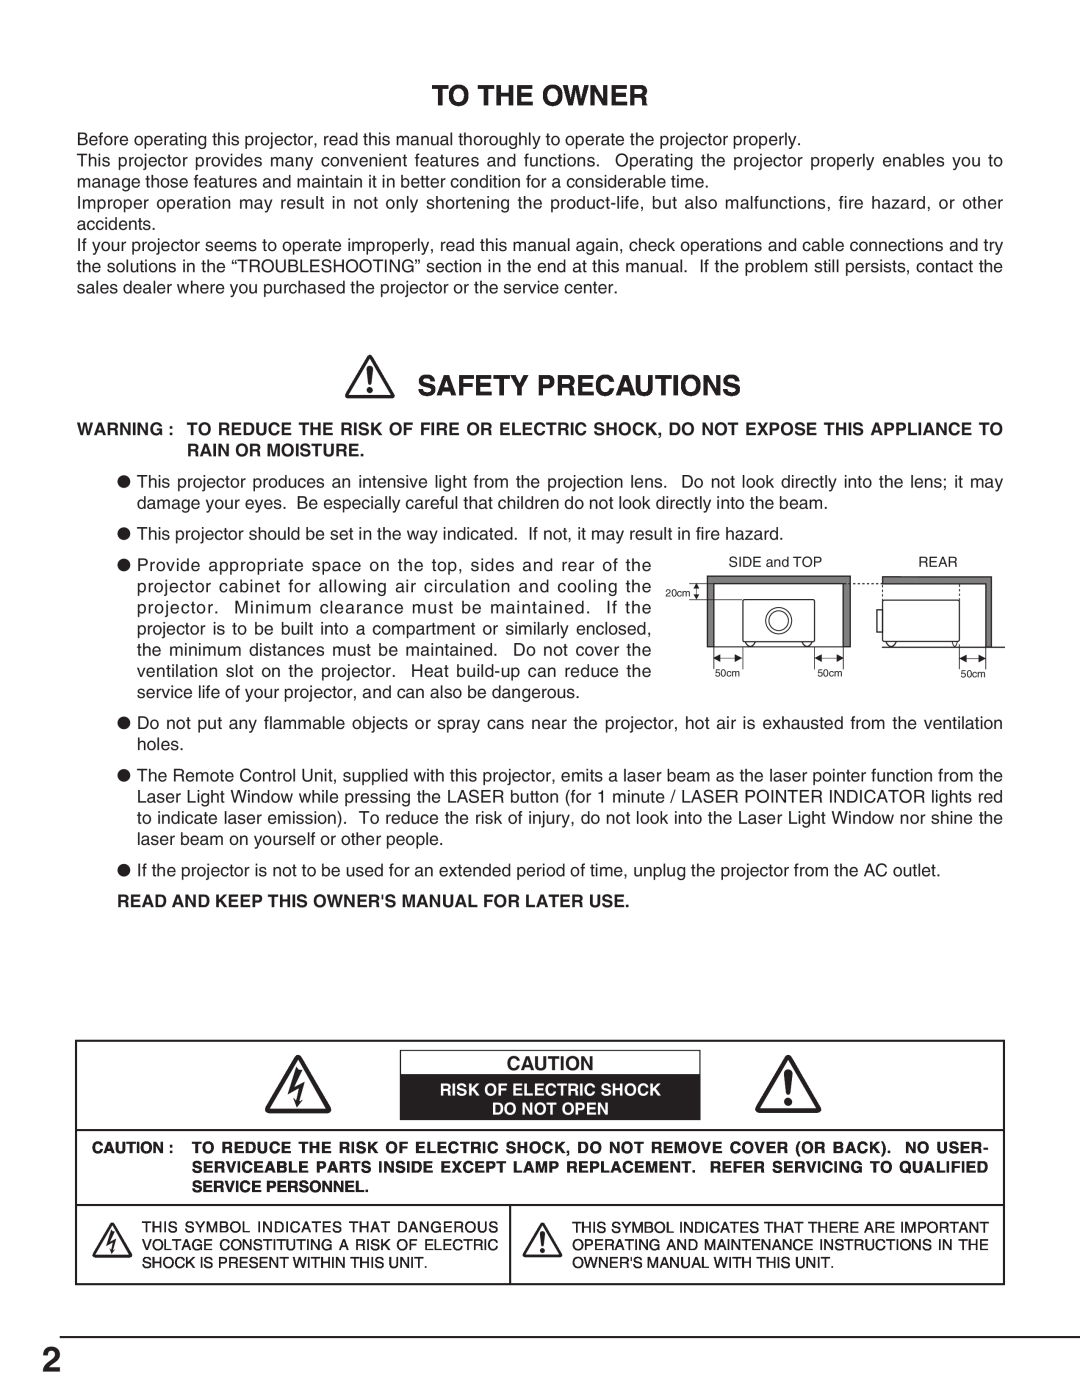 Canon LV-5200 owner manual To The Owner, Safety Precautions, Risk Of Electric Shock Do Not Open 